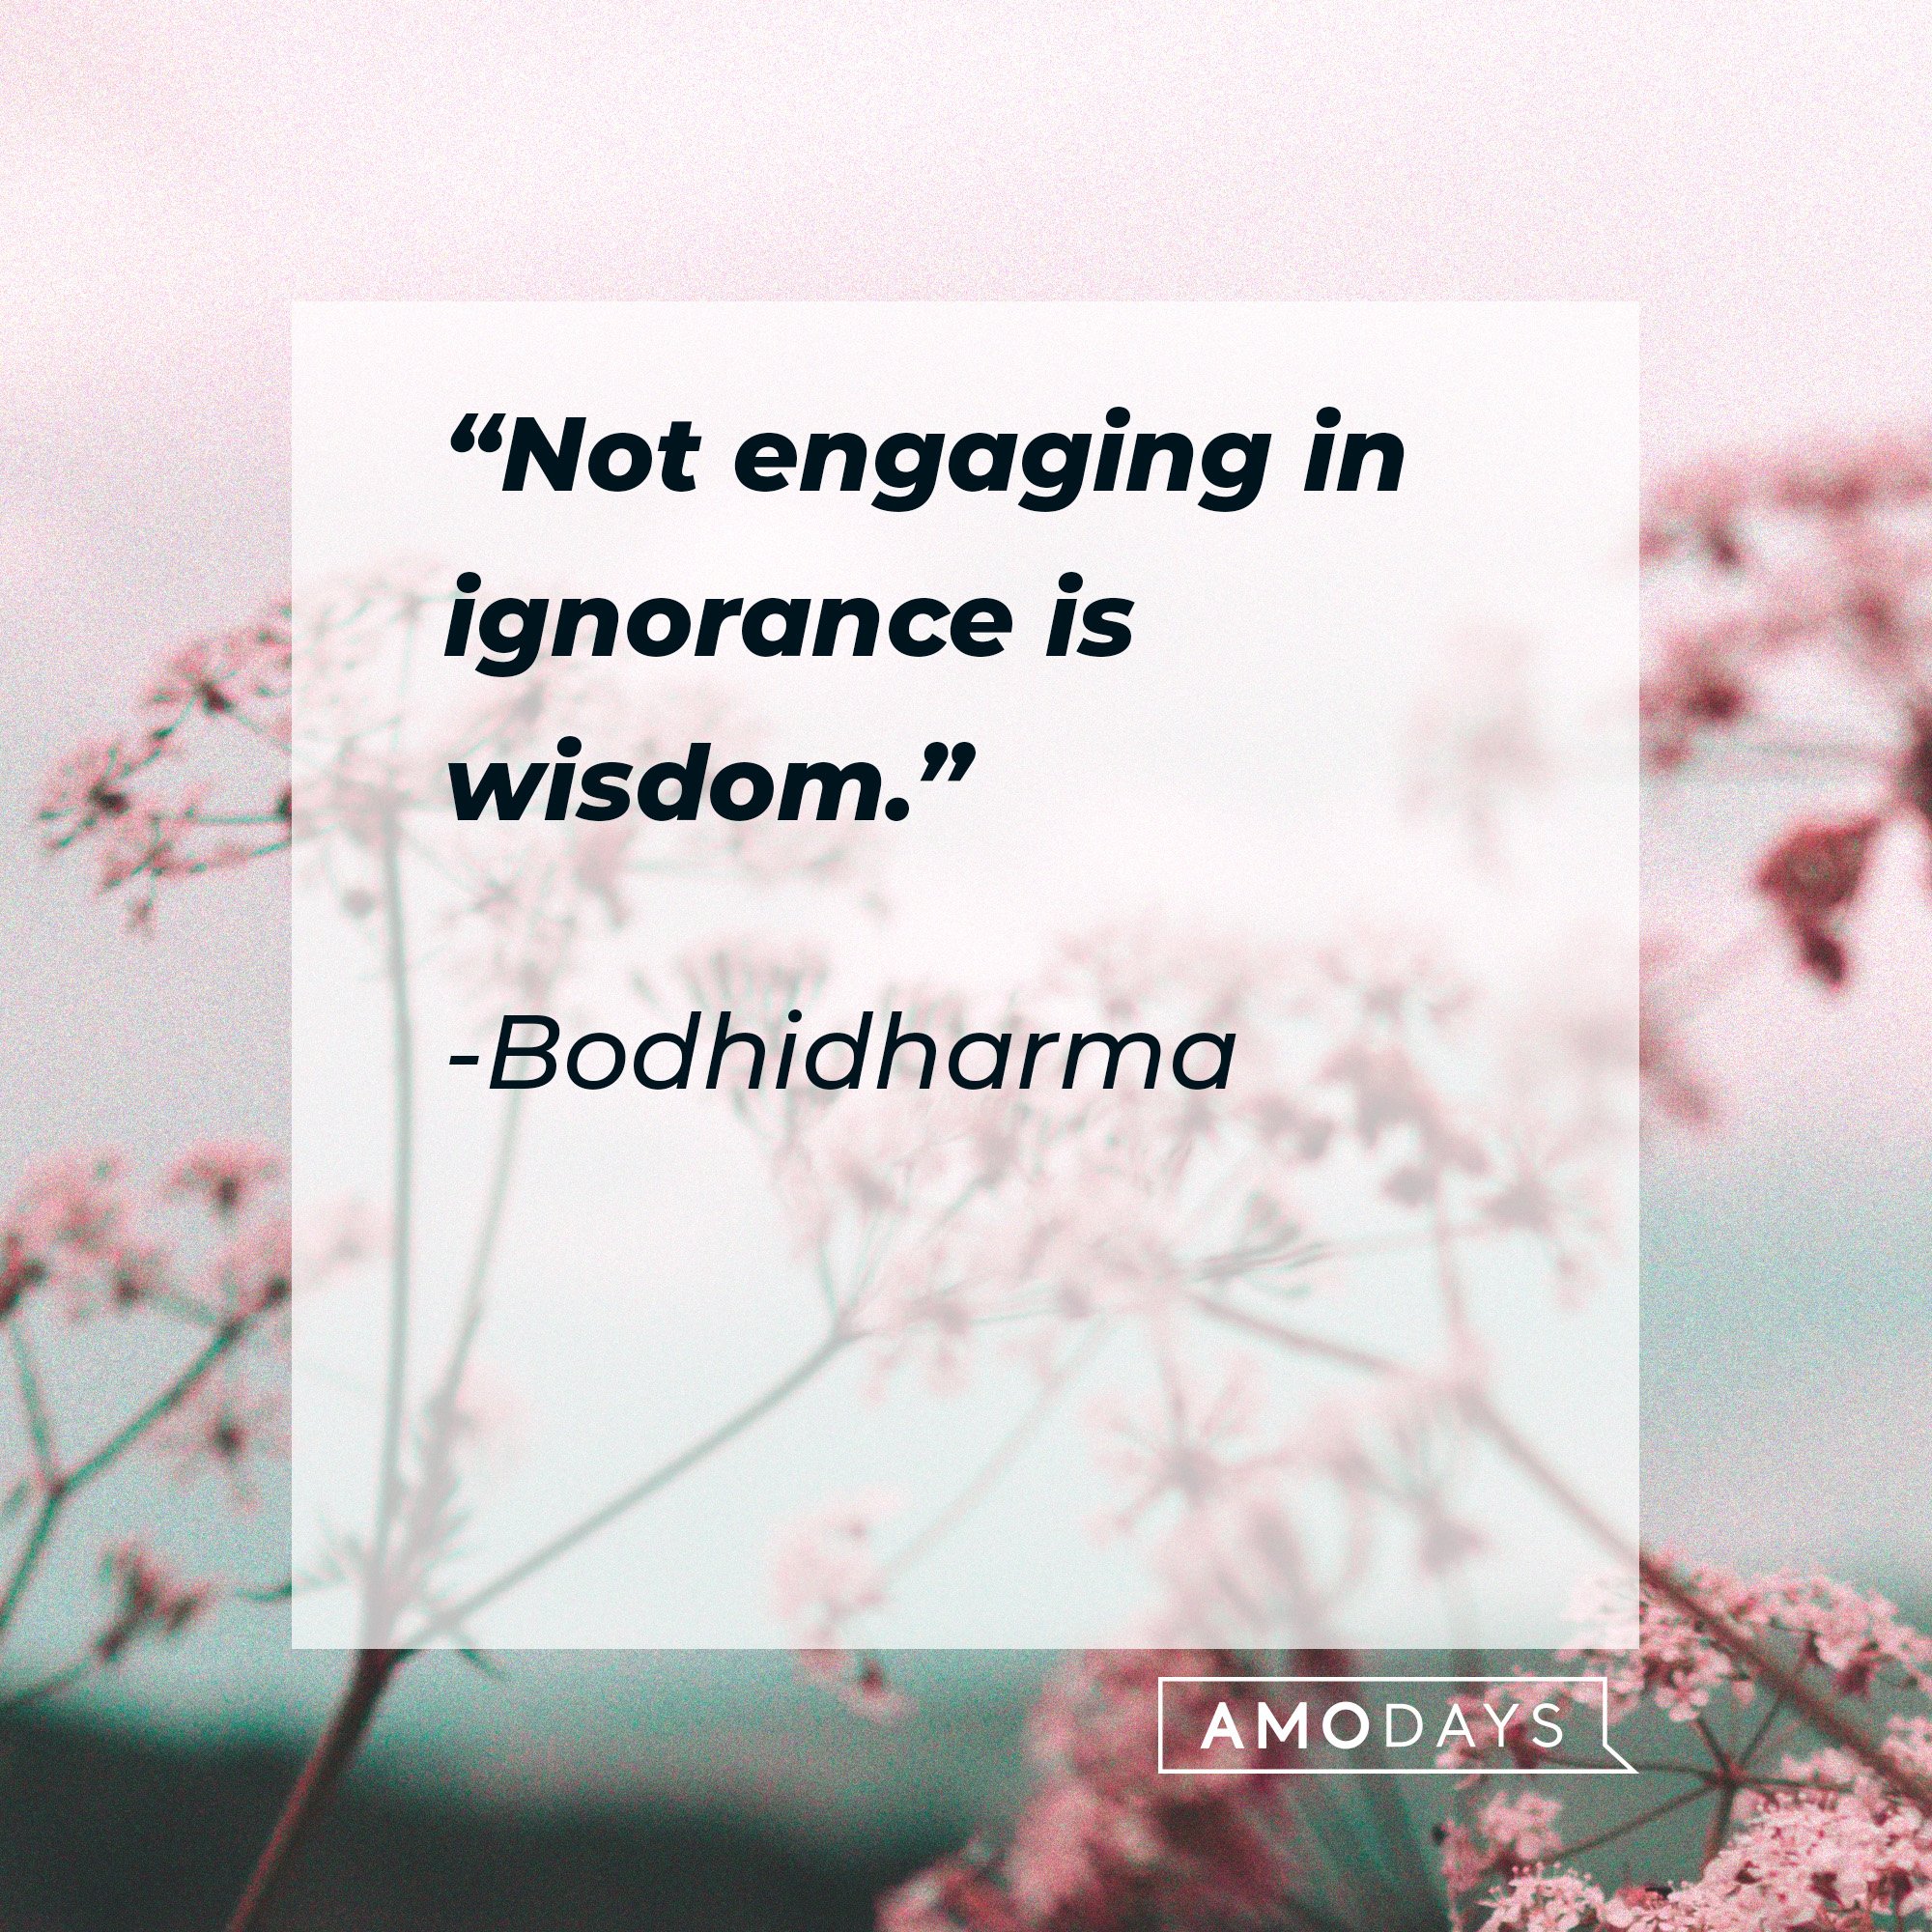 Bodhidharma's quote: “Not engaging in ignorance is wisdom.” | Image: AmoDays